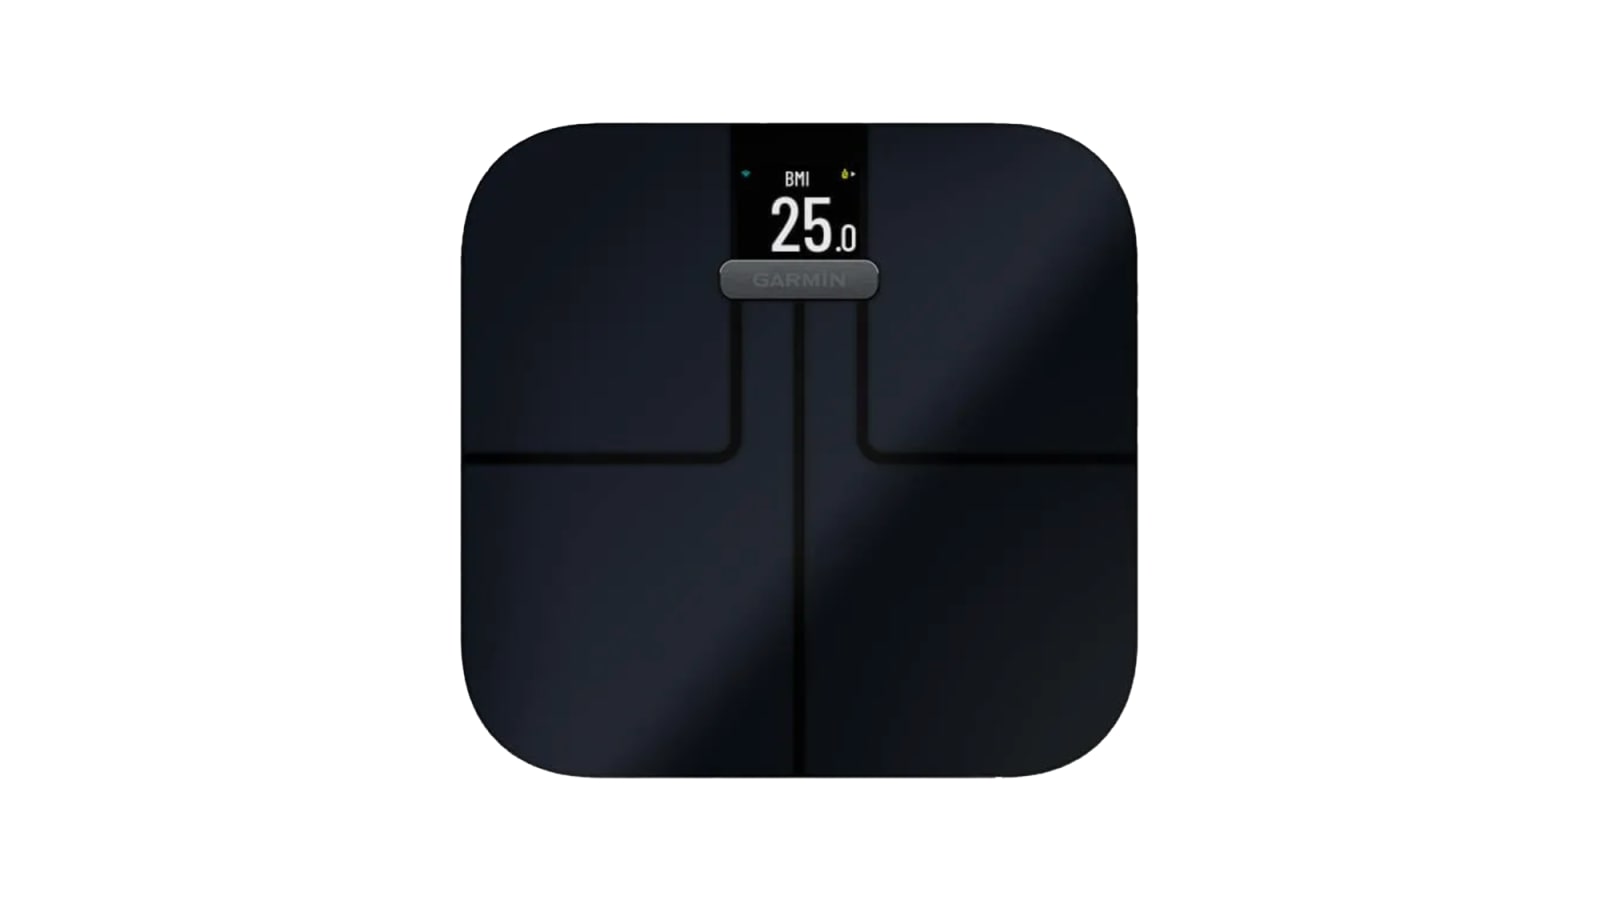 Garmin Index S2 Bathroom Scale Review - Consumer Reports